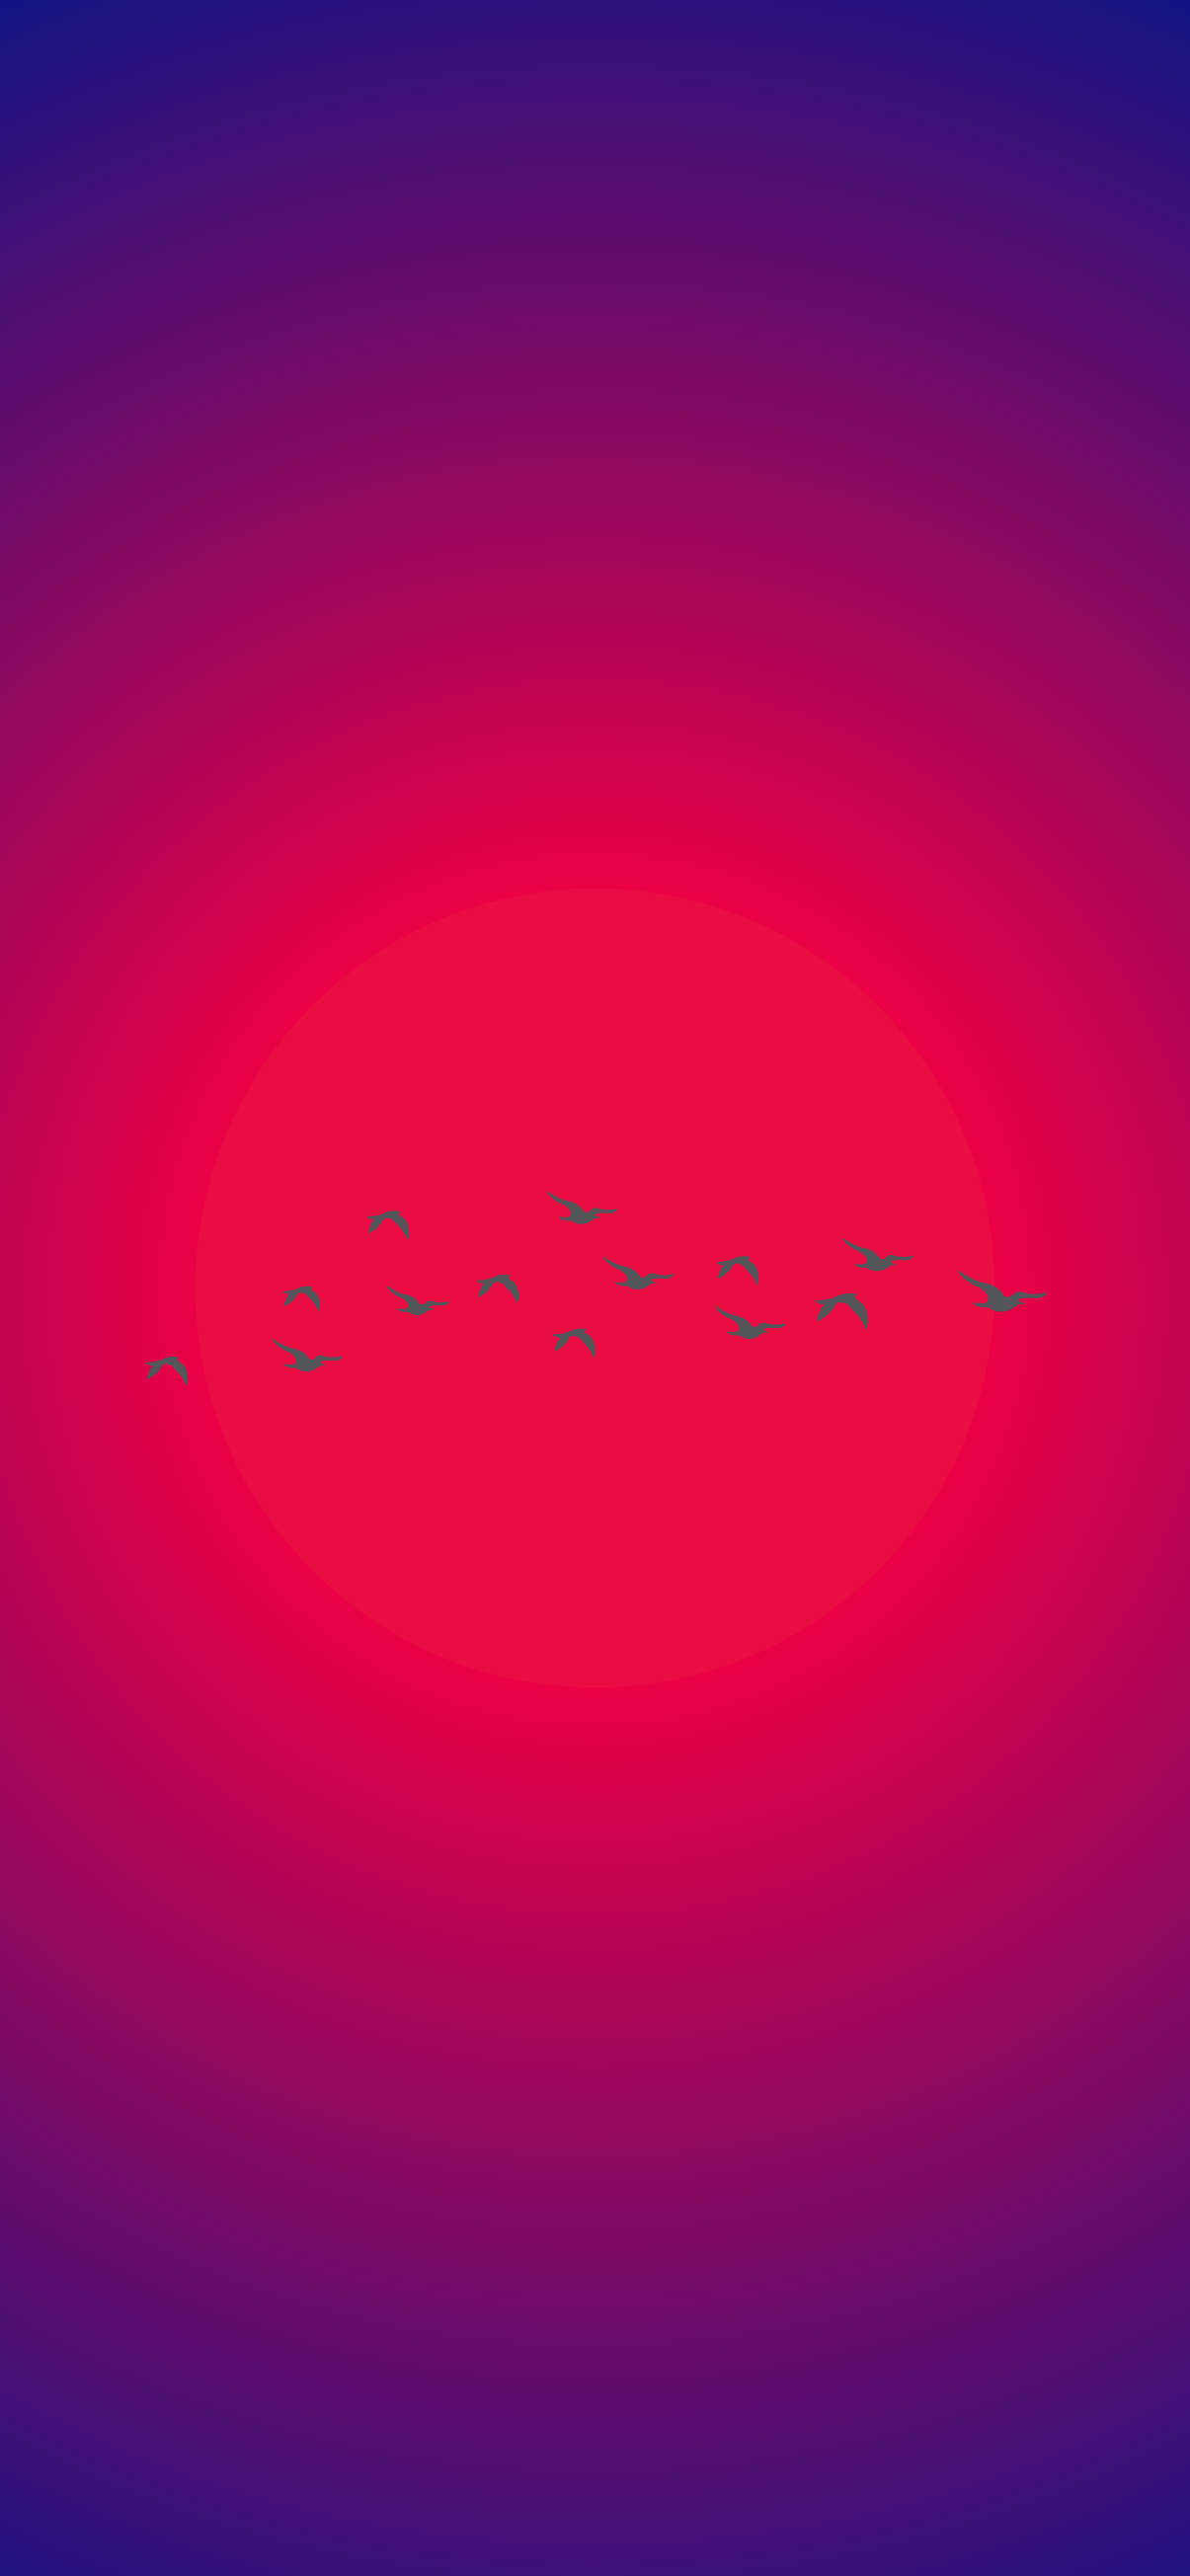 cool minimalistic aesthetic birds flying wallpaper for mobile phone in 4k